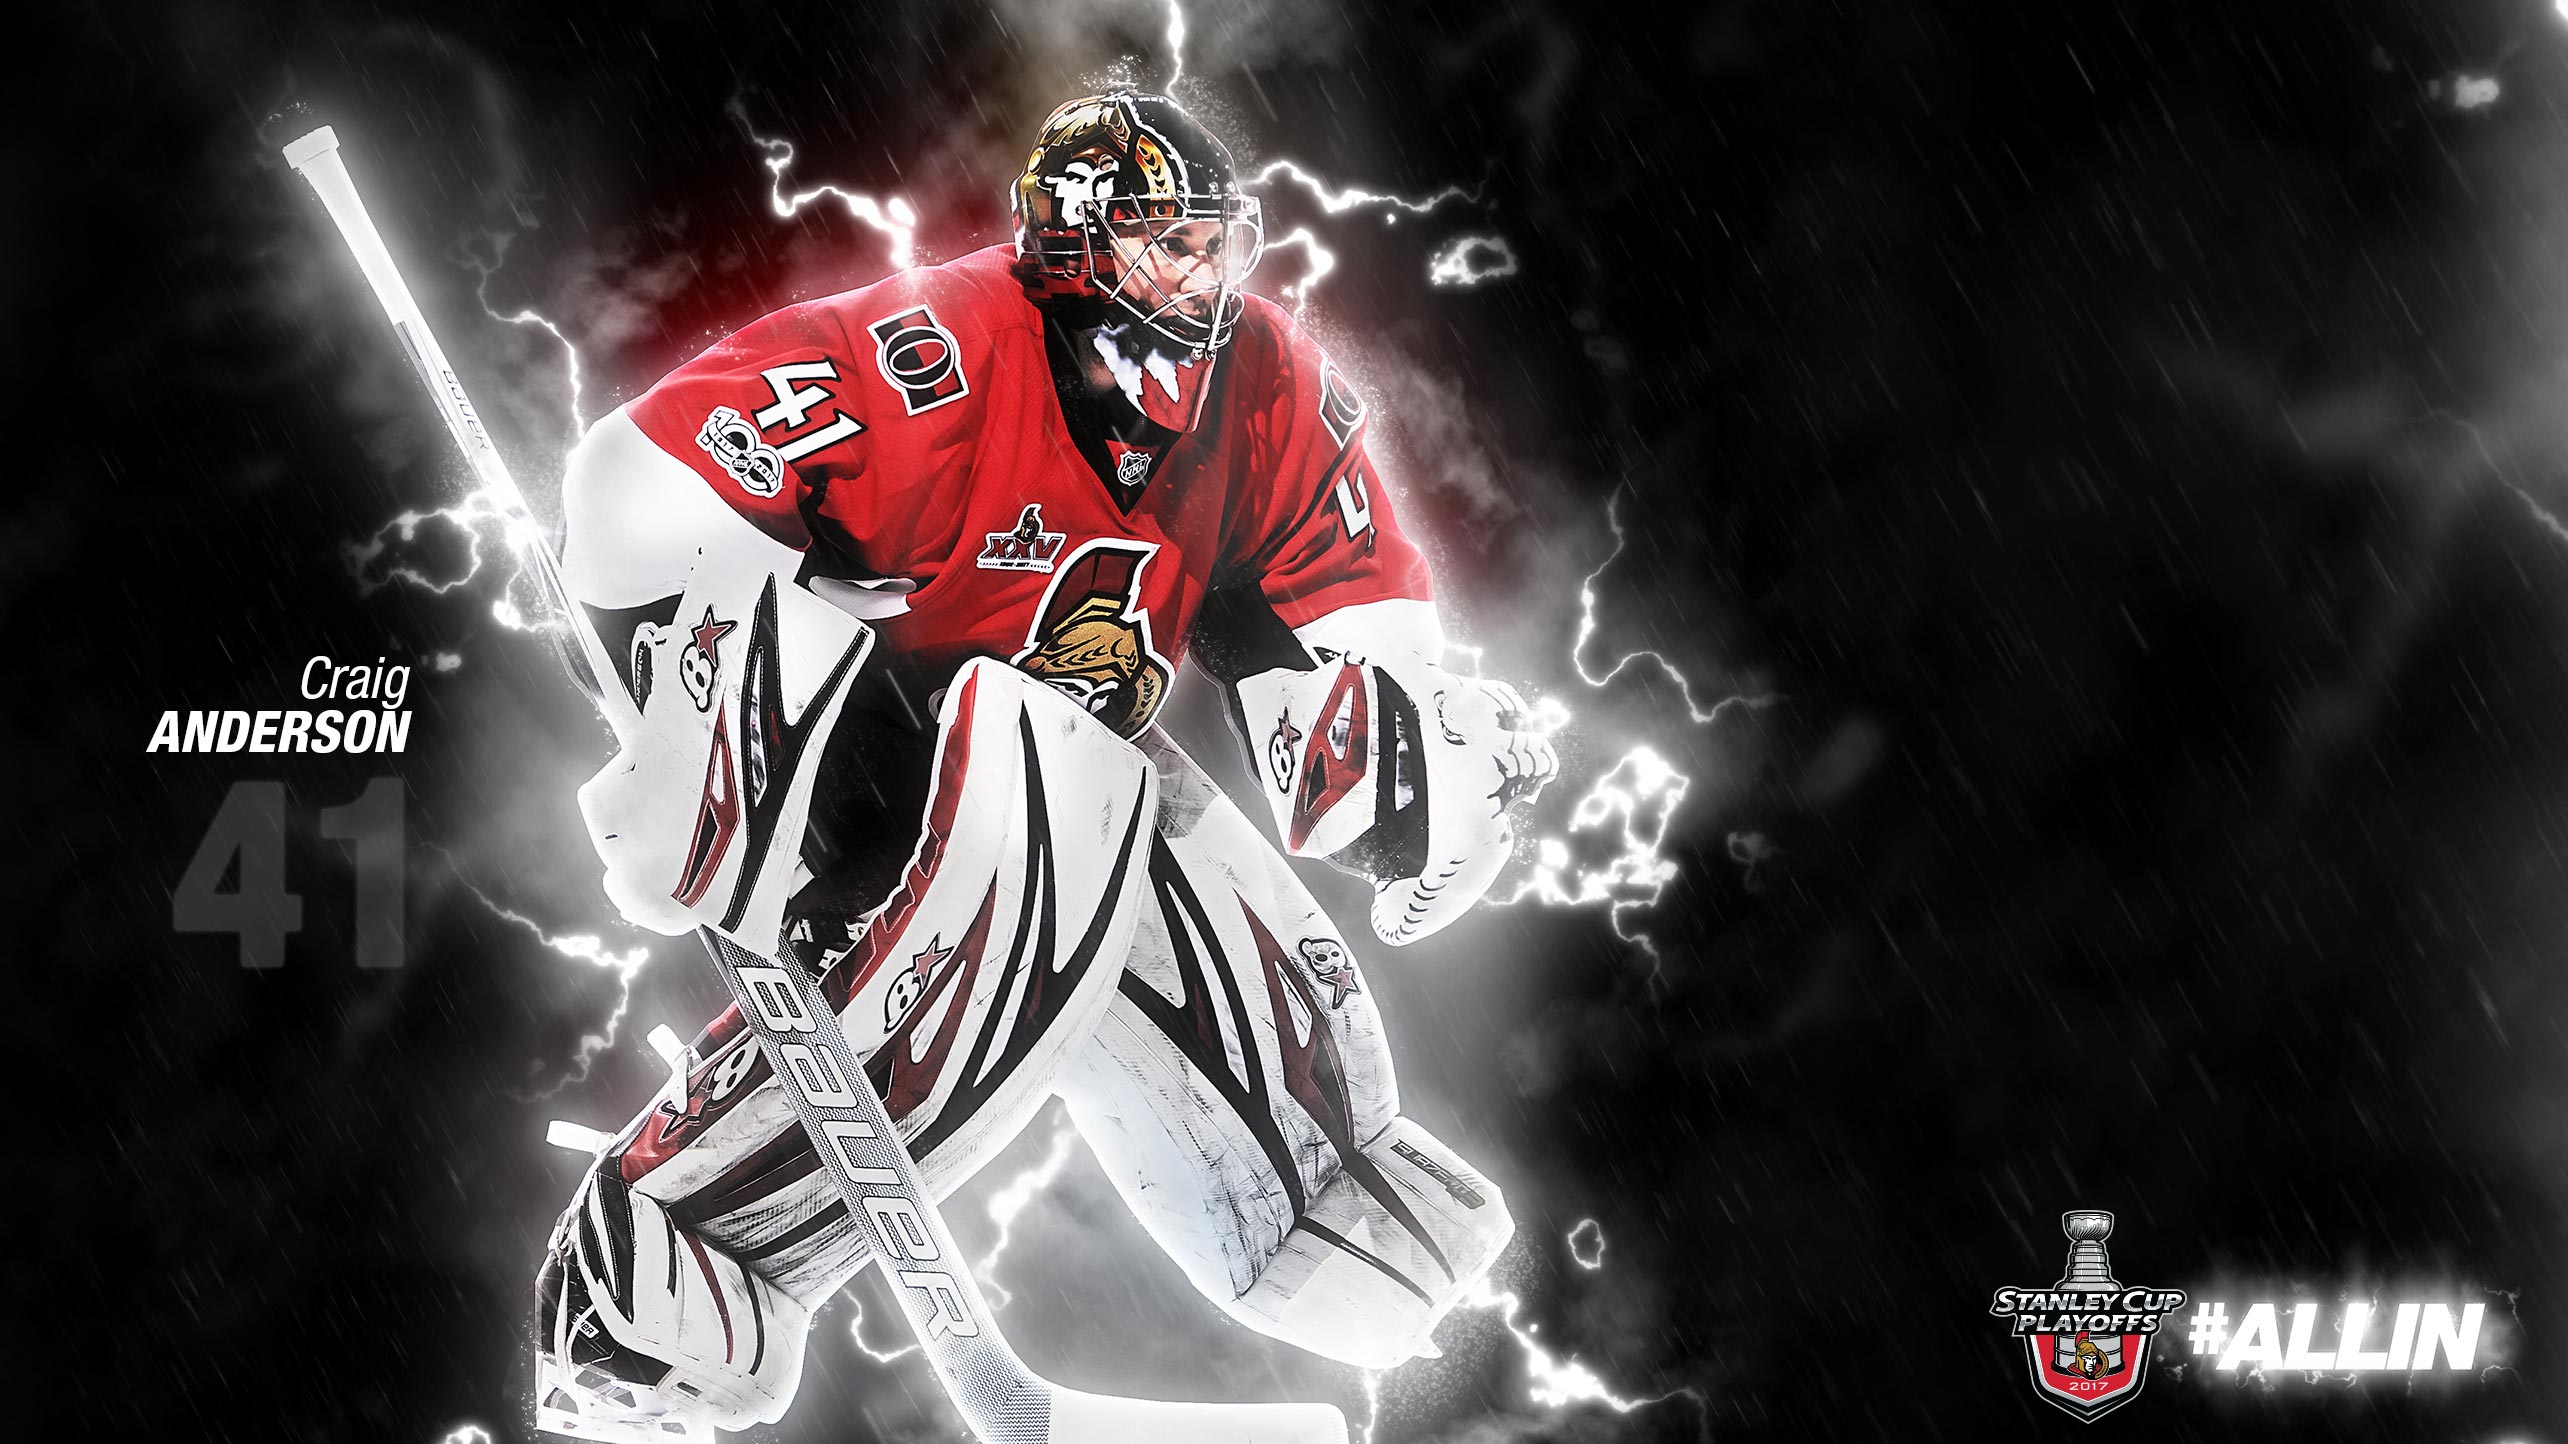 Wallpapers And Backgrounds - Craig Anderson Wallpaper Hockey , HD Wallpaper & Backgrounds